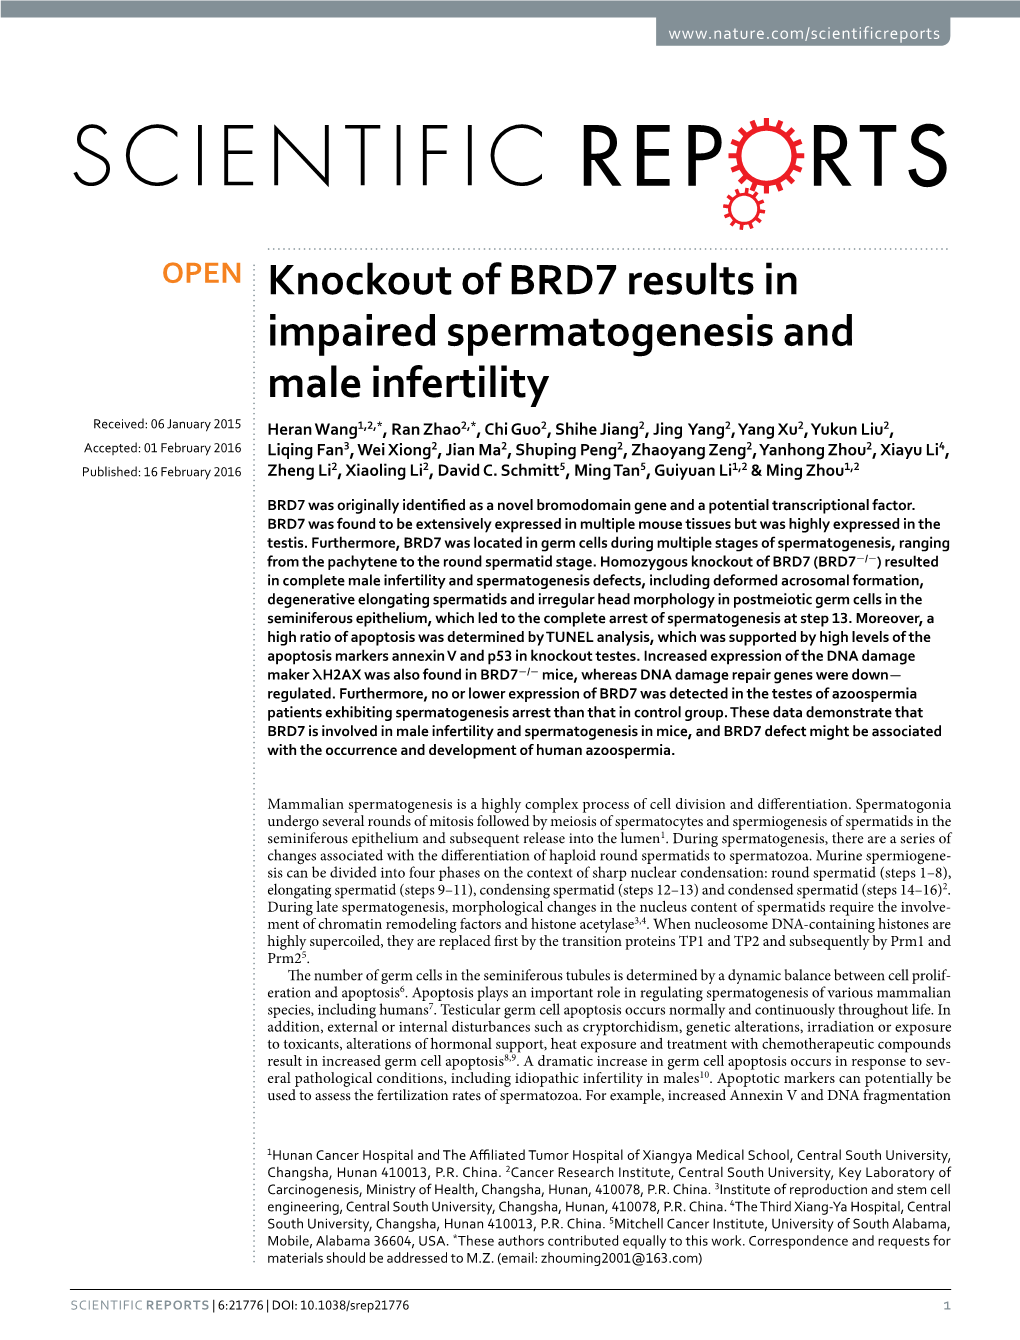 Knockout of BRD7 Results in Impaired Spermatogenesis and Male Infertility